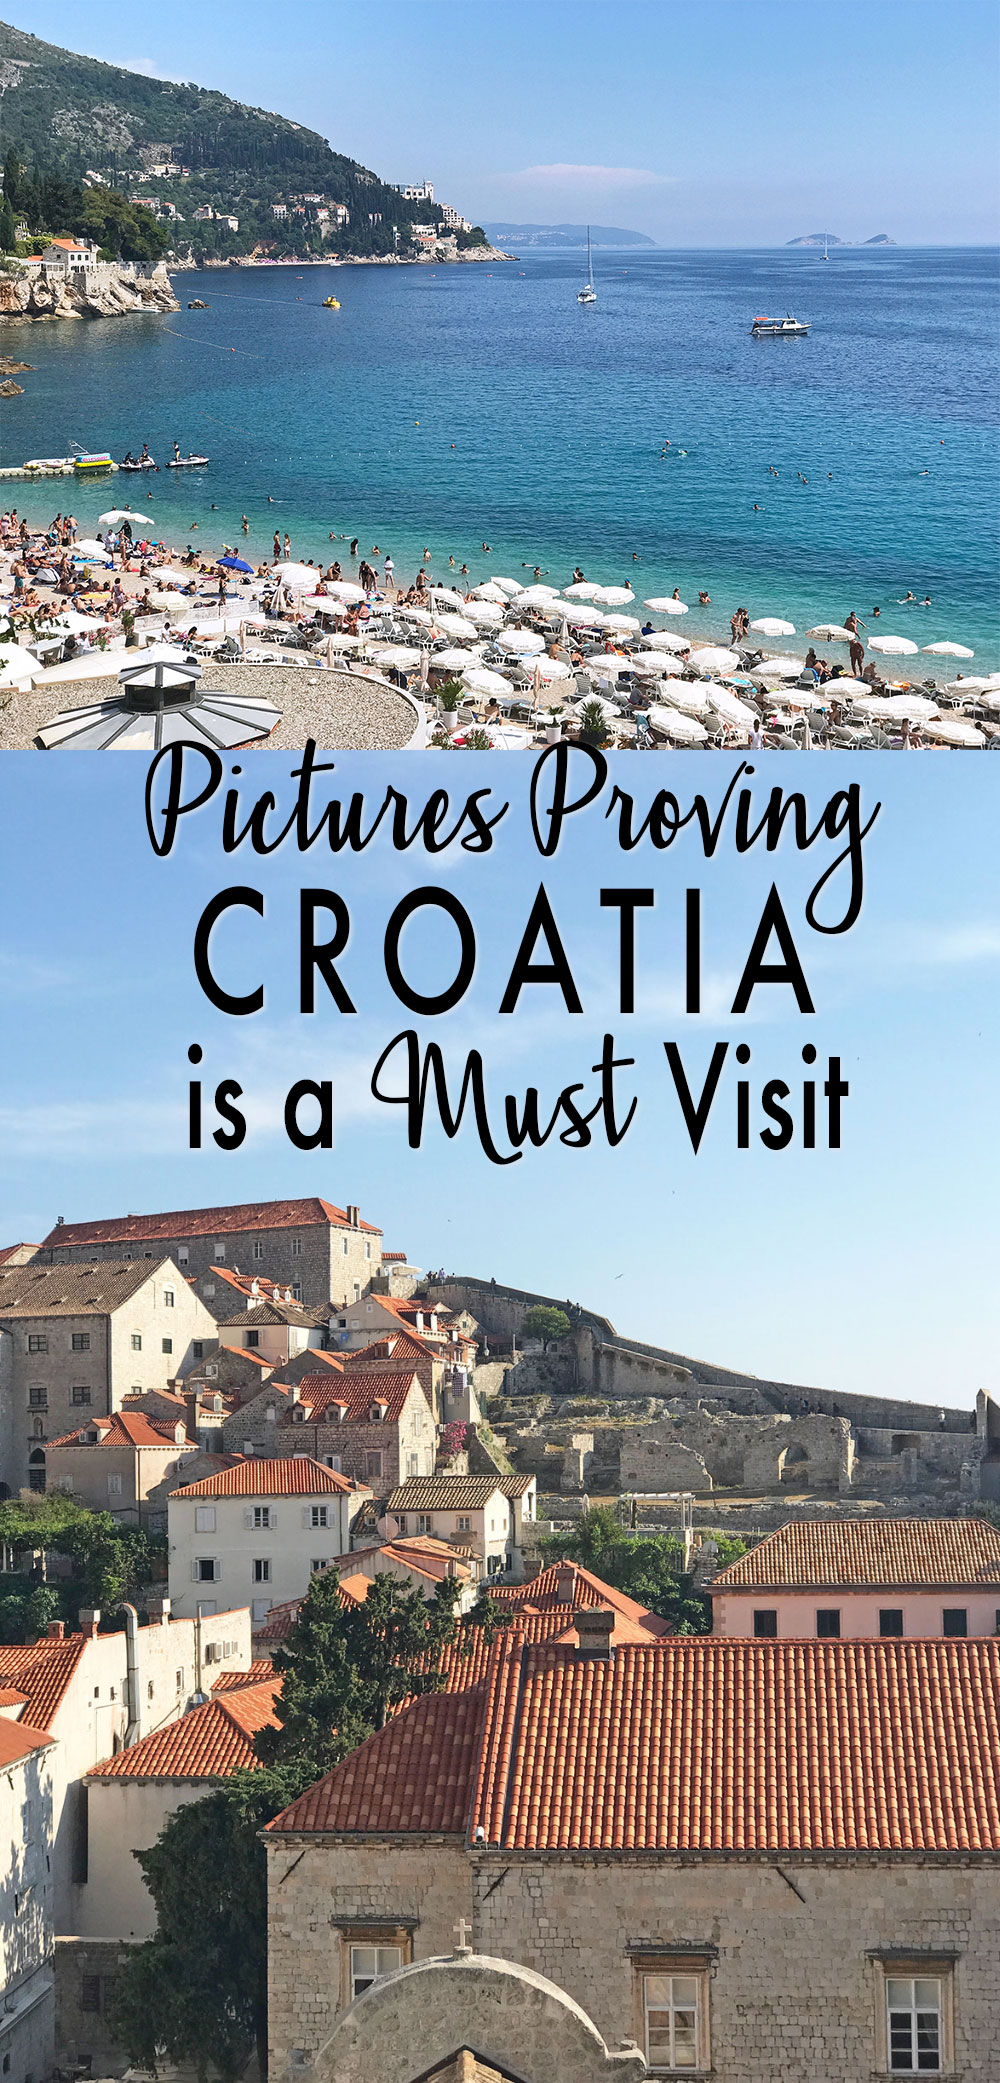 Pictures-Proving-You-Must-Visit-Croatia.jpg